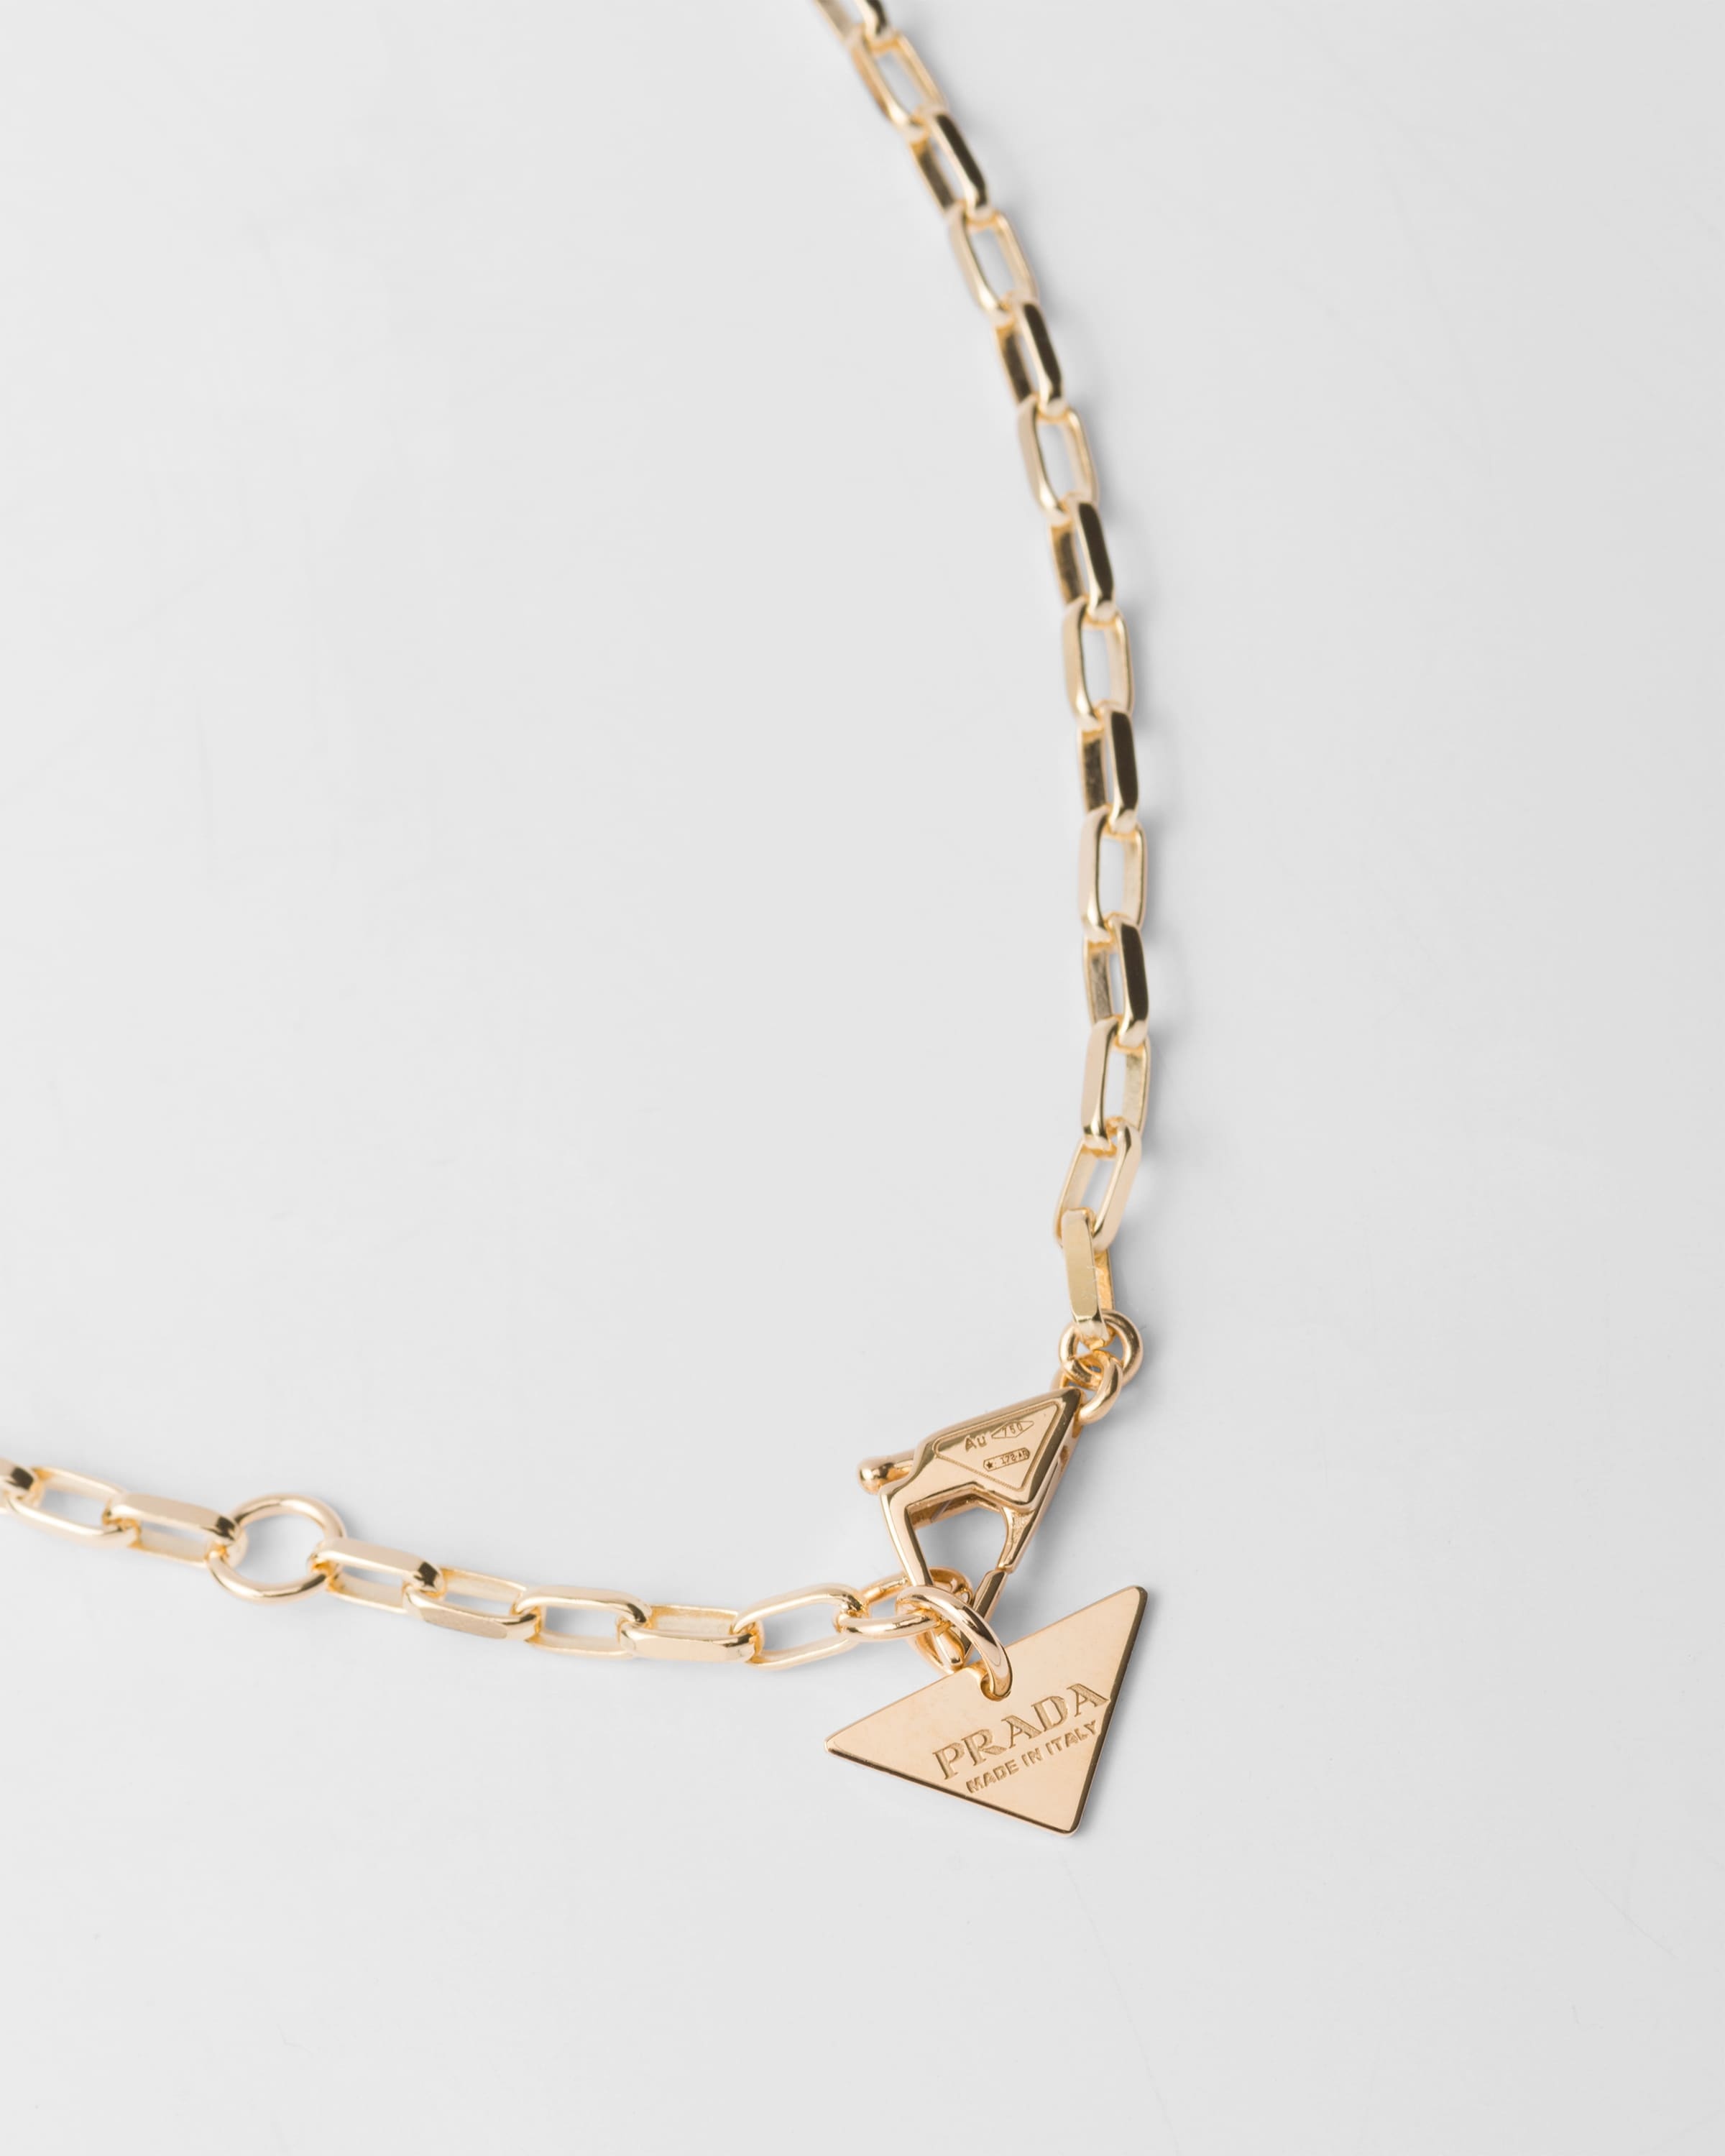 Eternal Gold small pendant necklace in yellow gold - 5